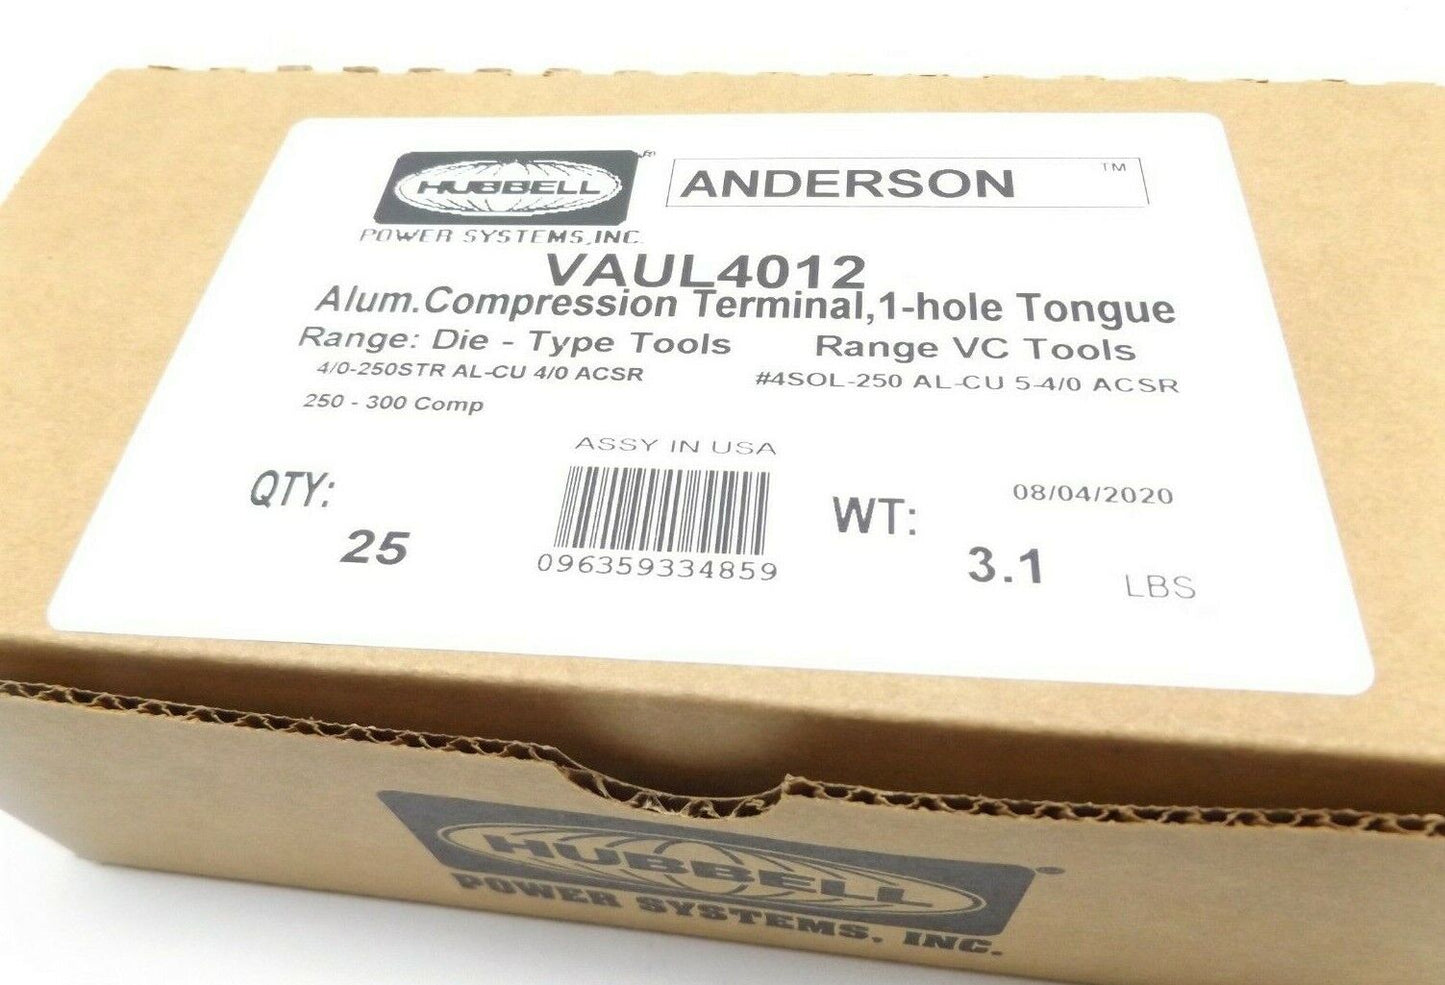 BOX OF 25 HUBBELL ANDERSON VAUL4012 ALUMINUM COMPRESSION TERMINAL 1-HOLE